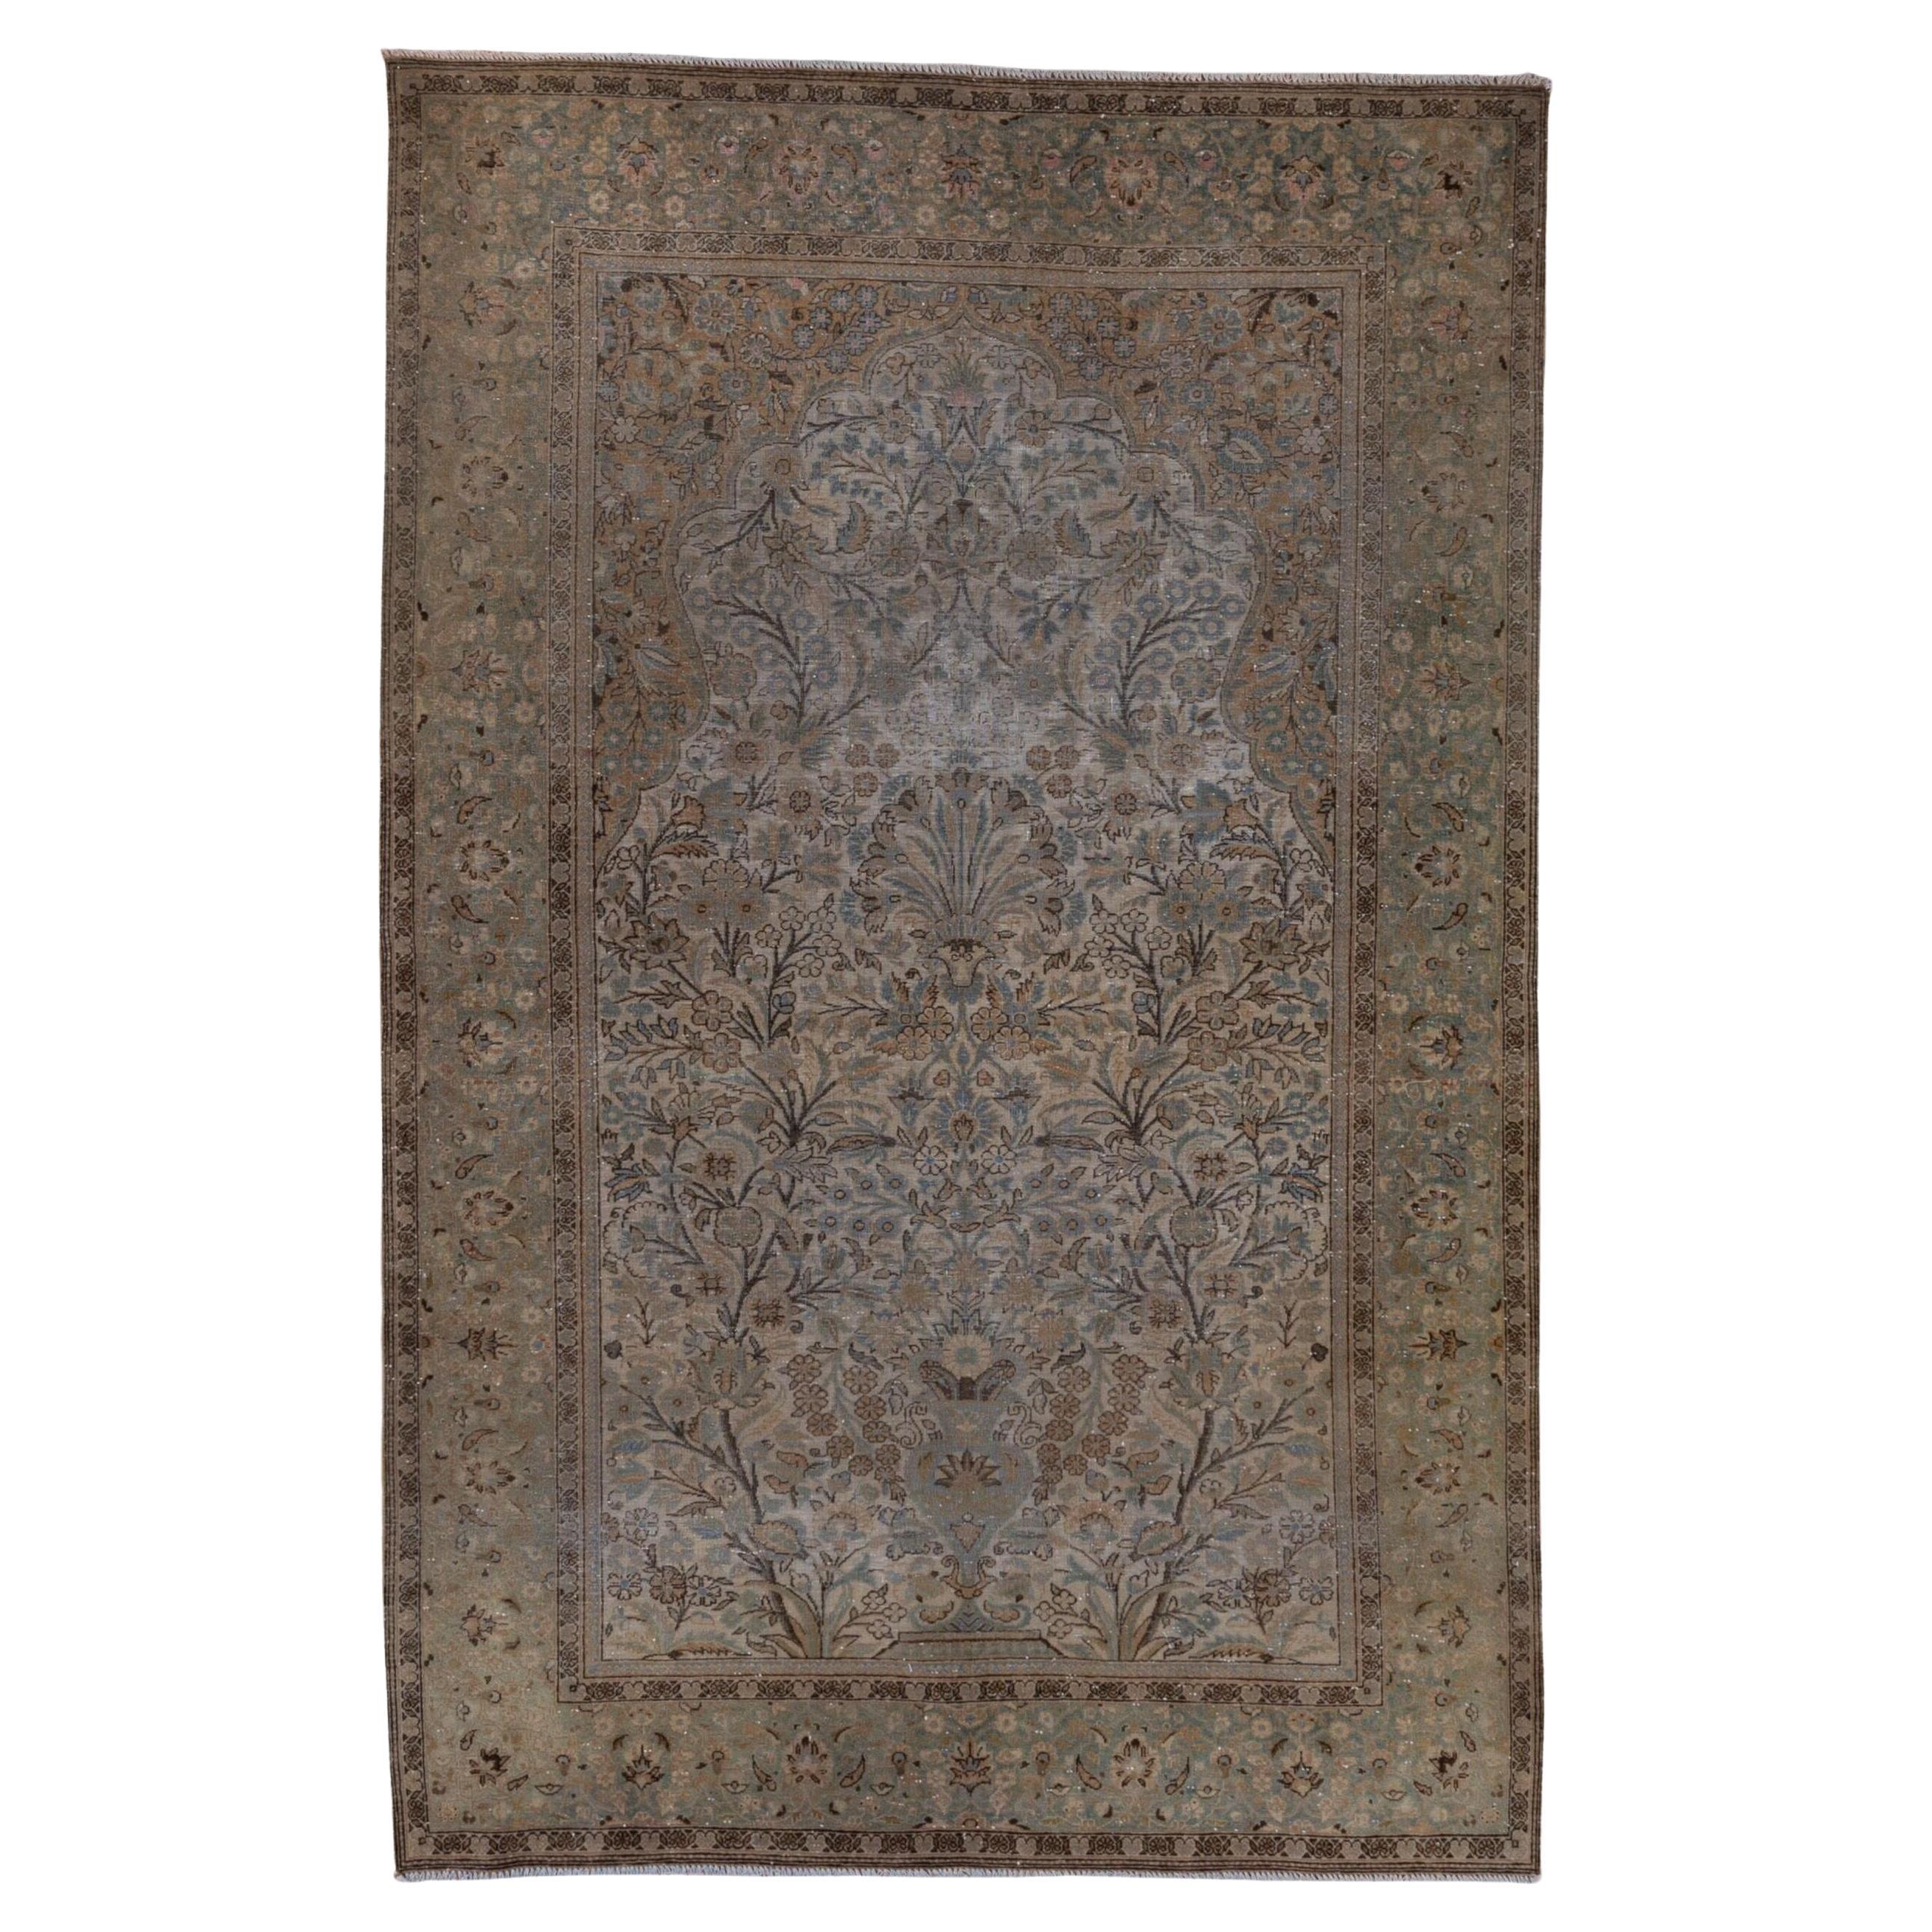 Fine Antique Persian Kashan Scatter Rugs with Earth Tones, Blues & Greens